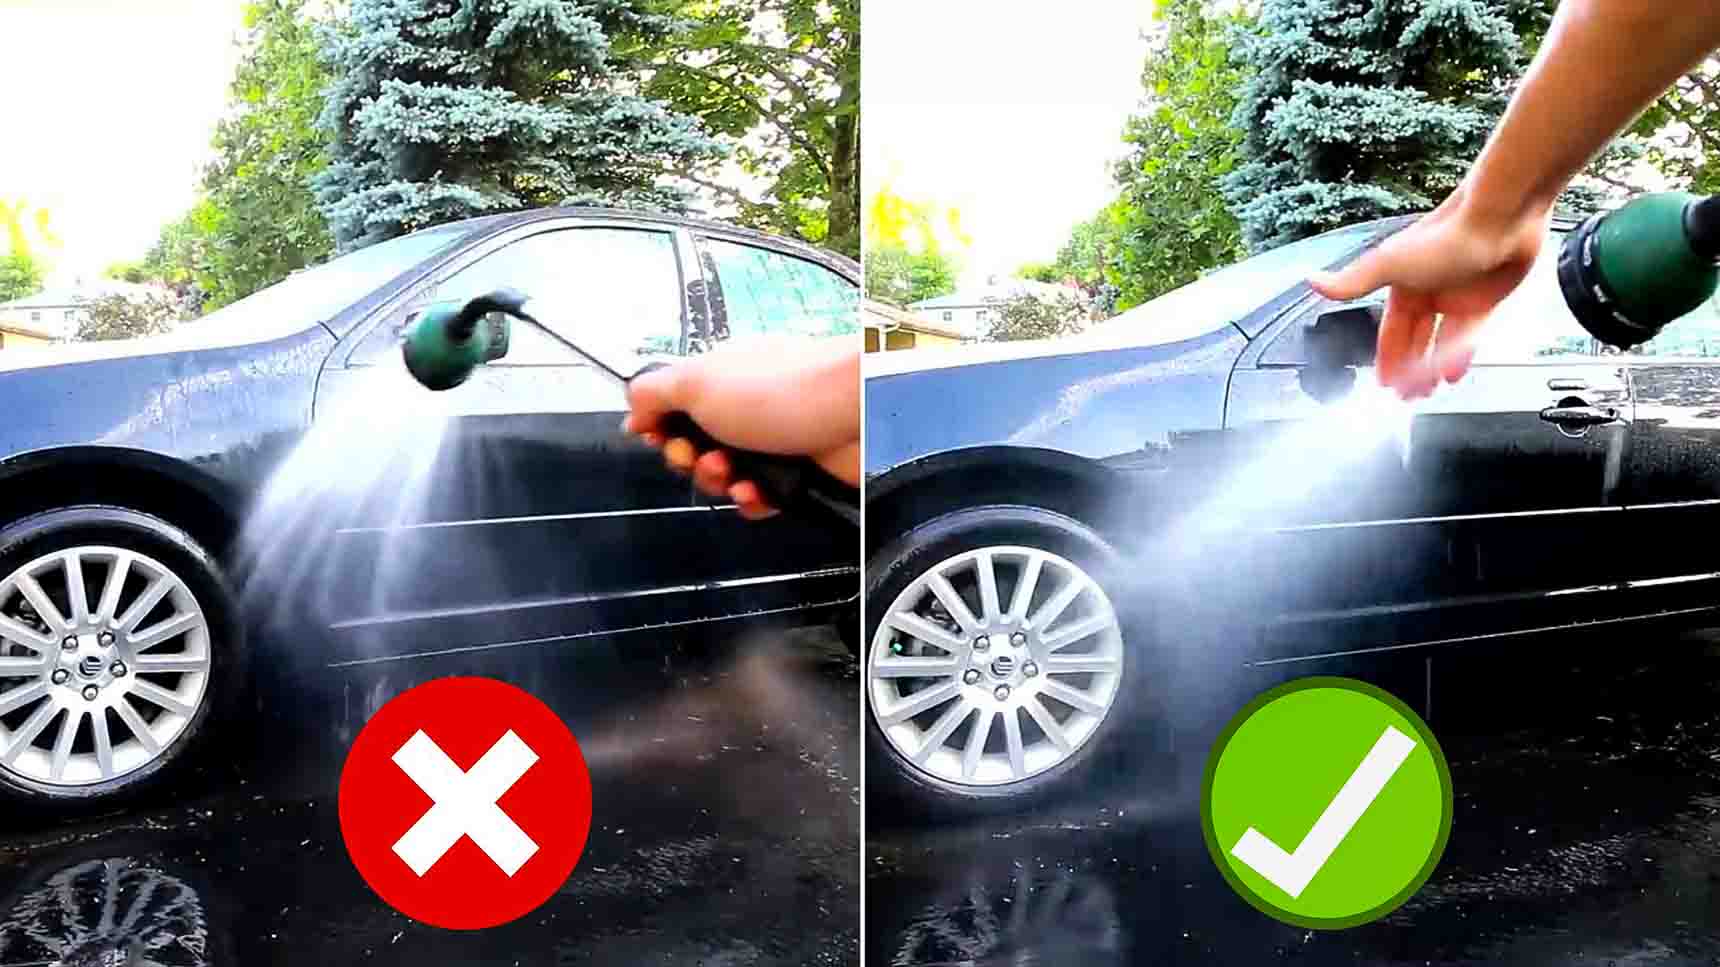 Top 10 Car Cleaning Mistakes